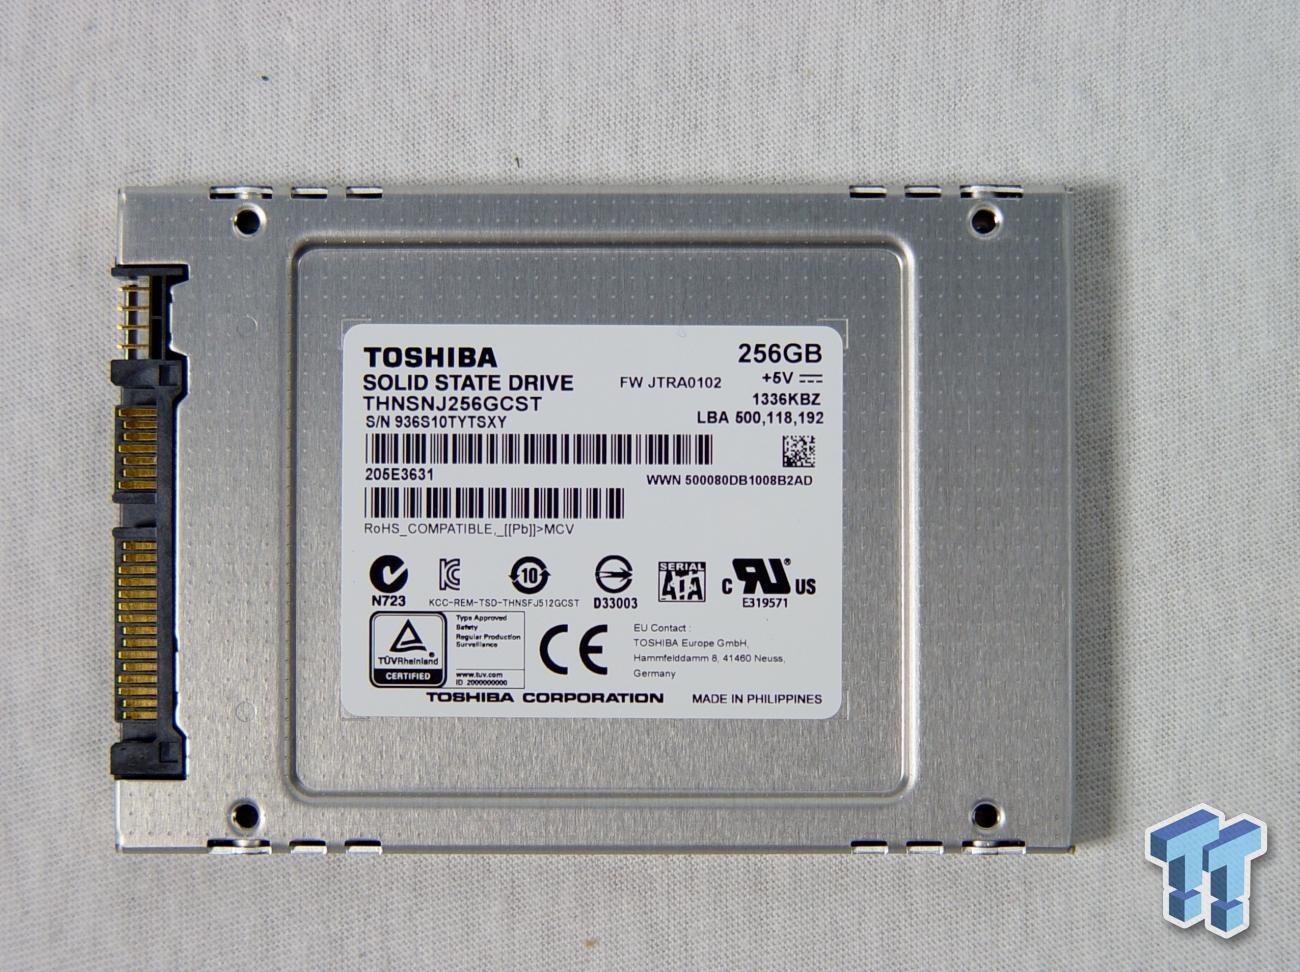 Cerebrum Oswald skipper Toshiba Q Series Pro 256GB SSD Review - Offers Great Value | TweakTown